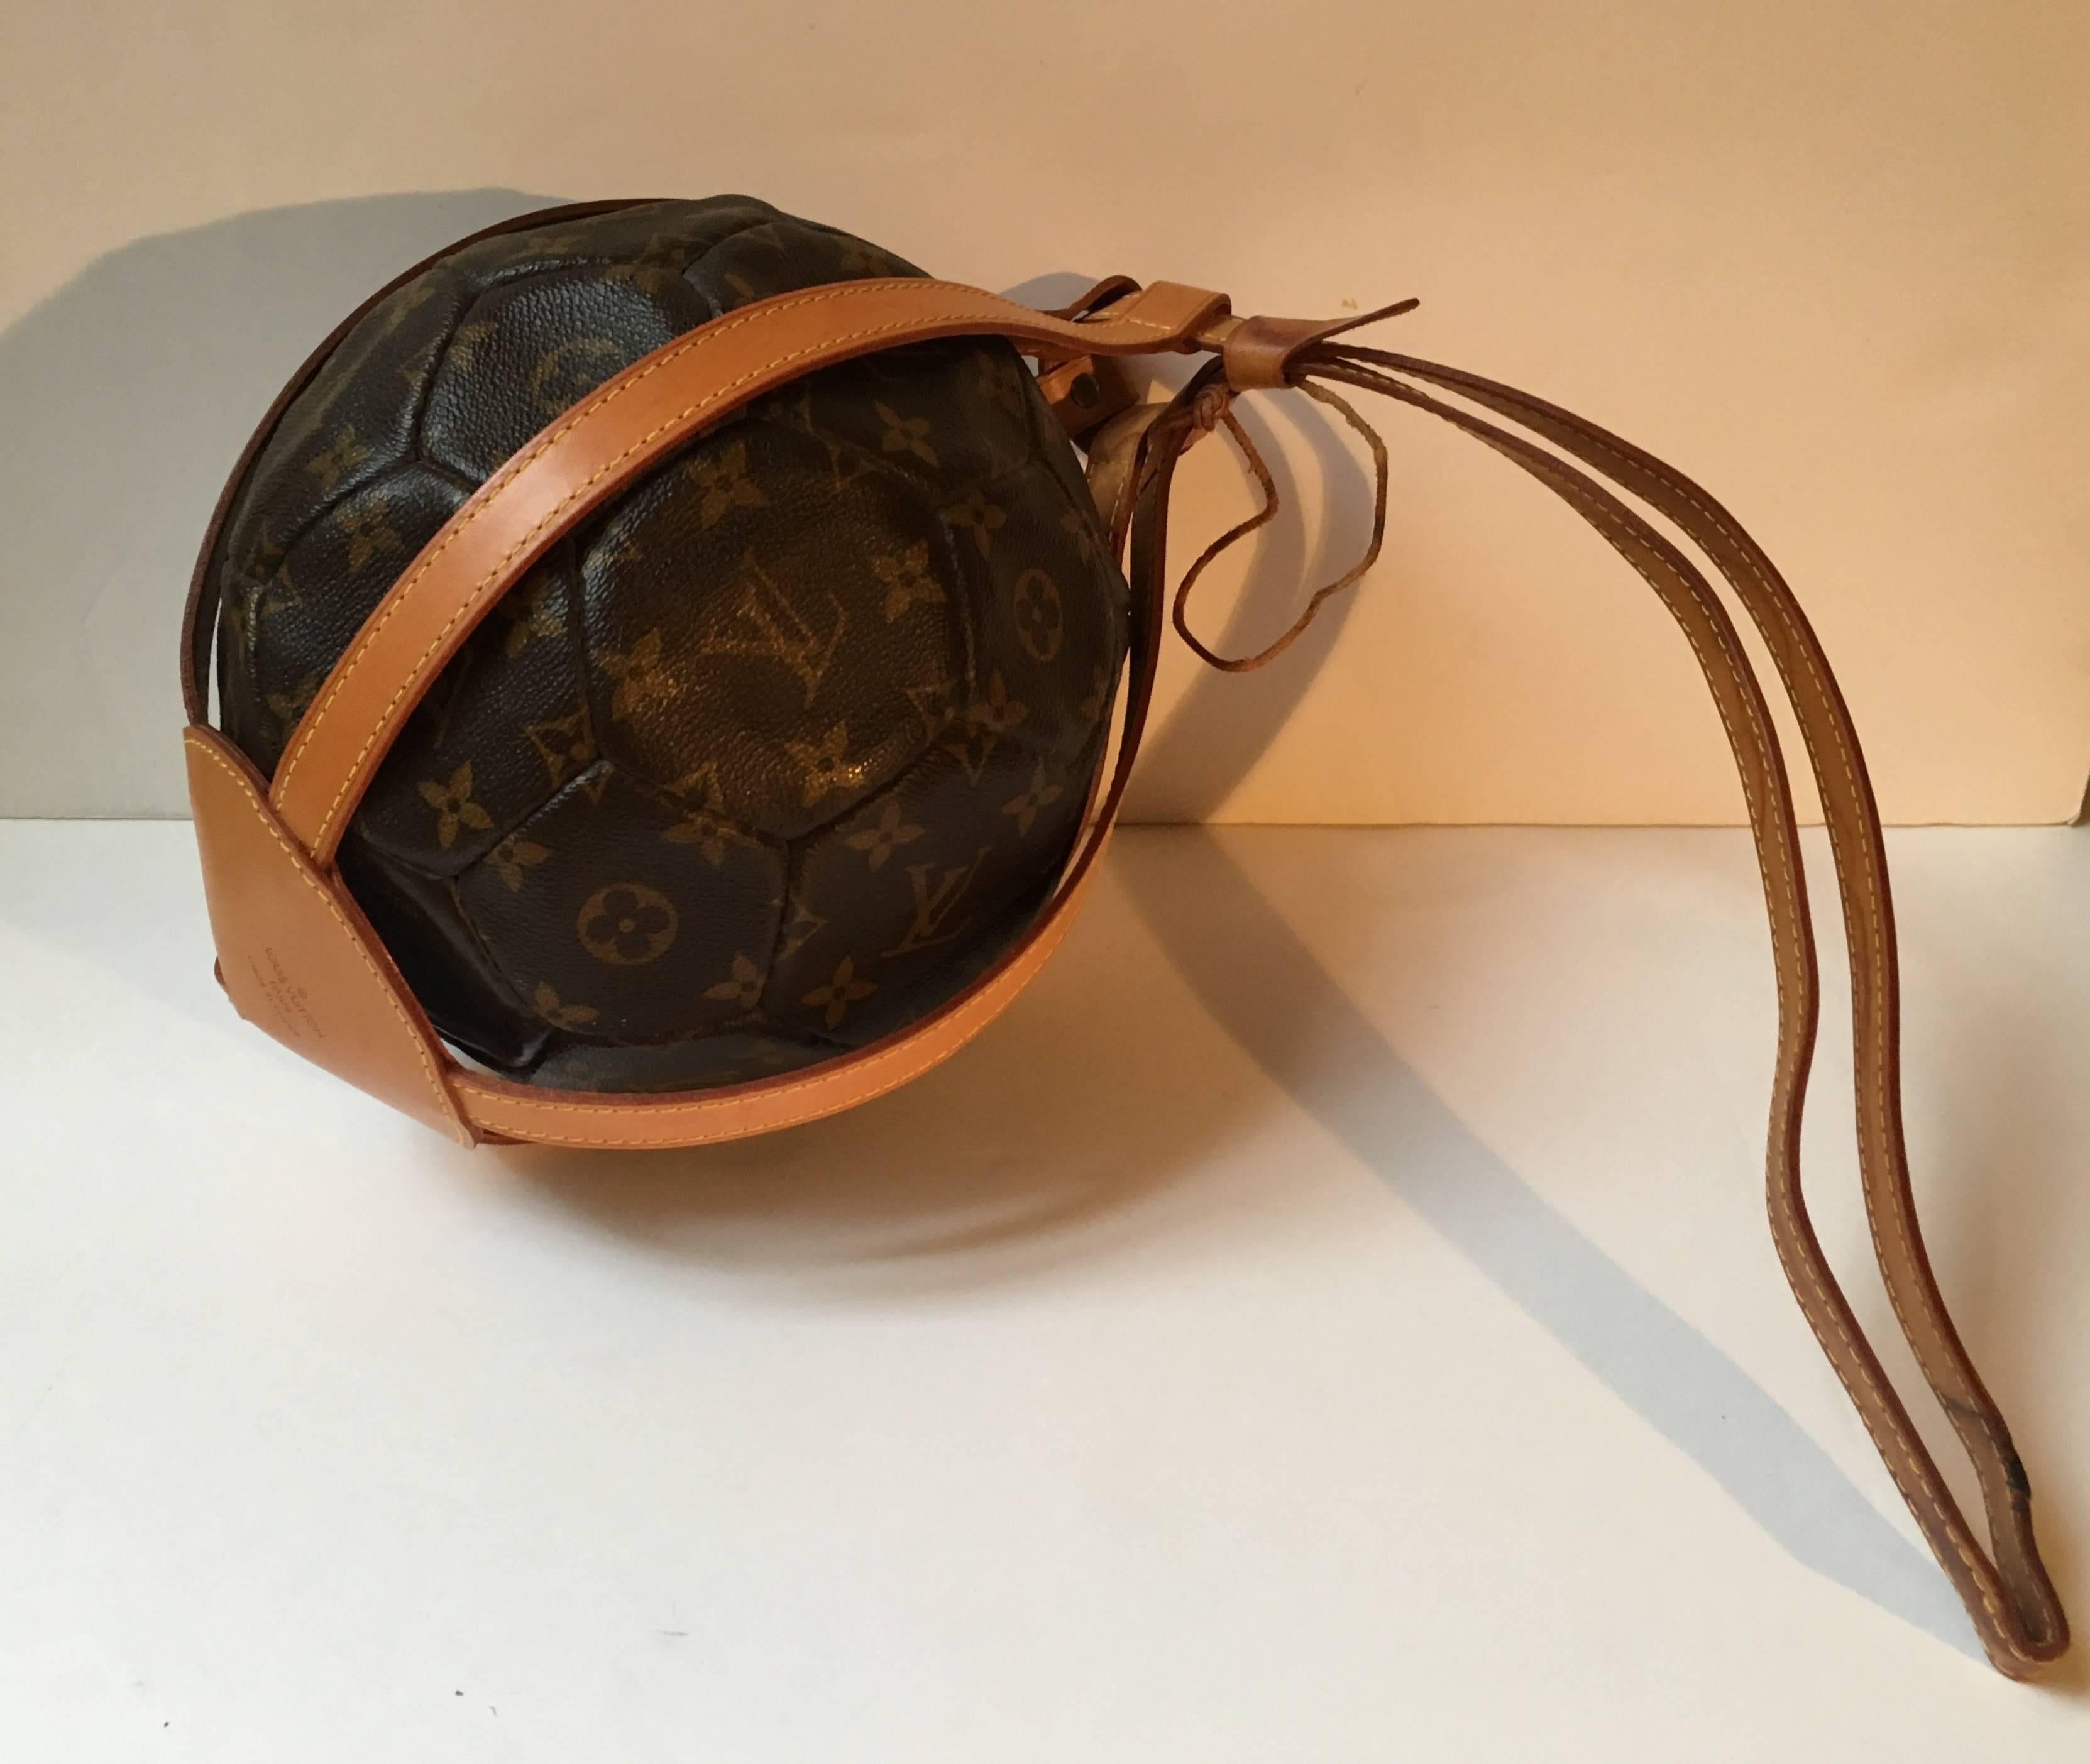 Louis Vuitton rare Leather Soccer Ball, World Cup France 1998 Limited Edition 
Cowhide cone shaped carry holdall/strap and Ball both emblazoned  with the Louis Vuitton in Gold (Louis Vuitton Paris and France 1998 on the ball base ) and both engraved